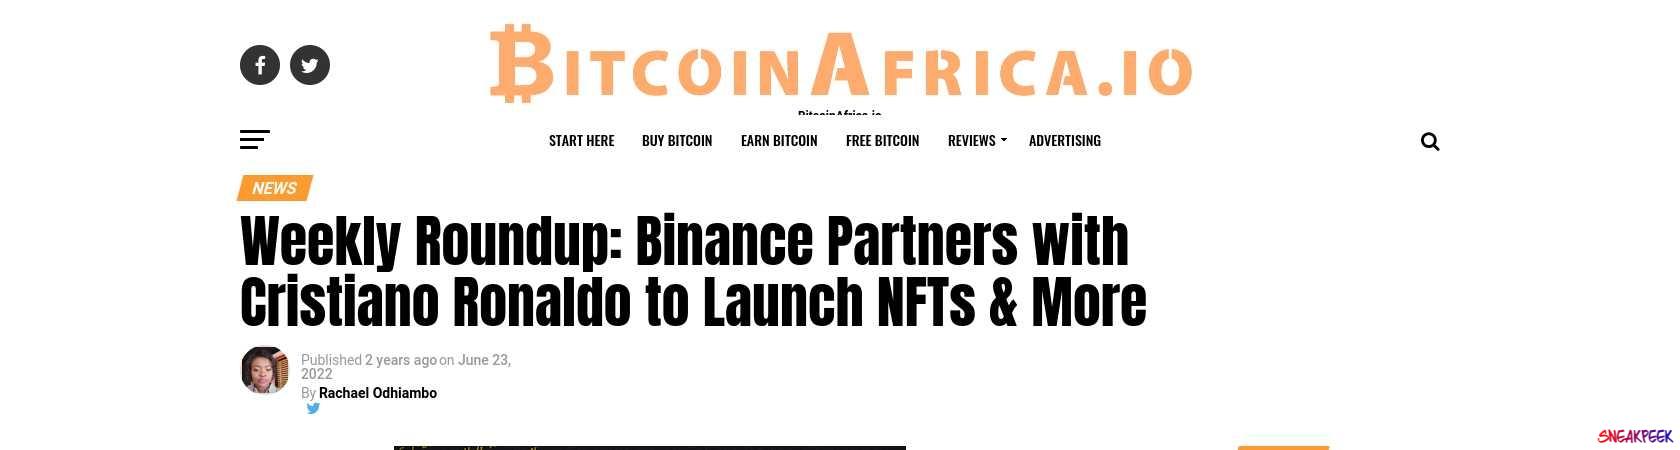 Read the full Article:  ⭲ Weekly Roundup: Binance Partners with Cristiano Ronaldo to Launch NFTs & More